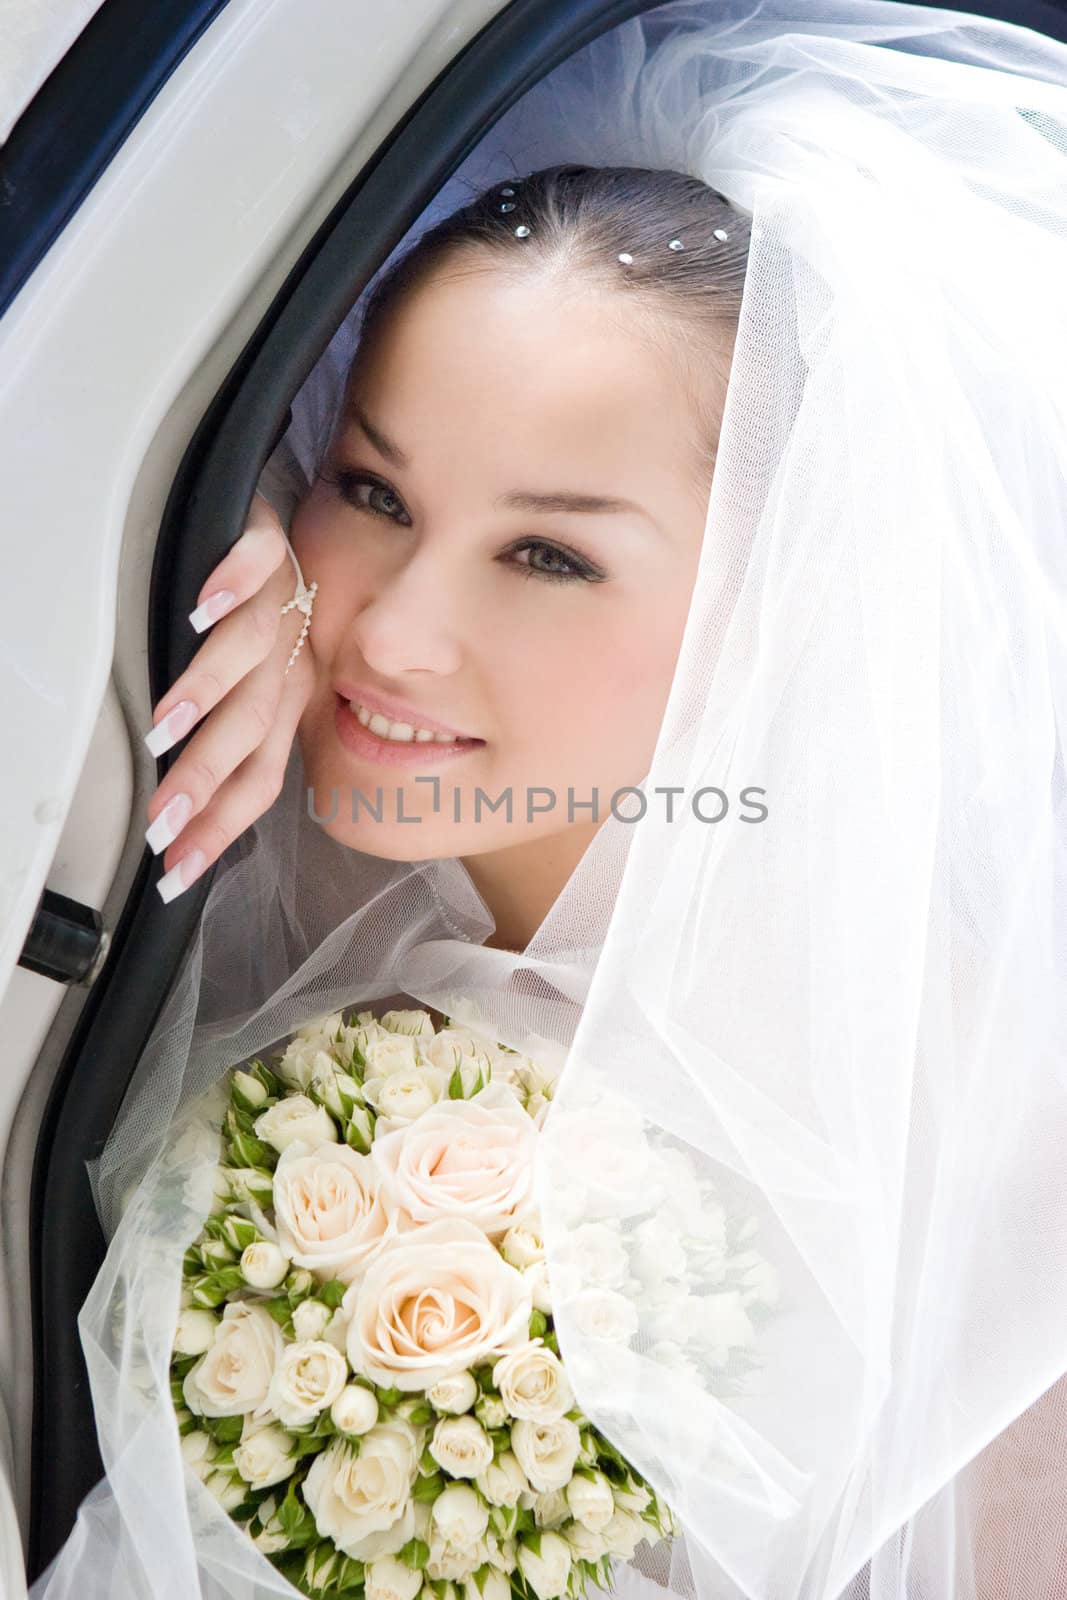 The happy bride looks out from the open door of the car by vsurkov